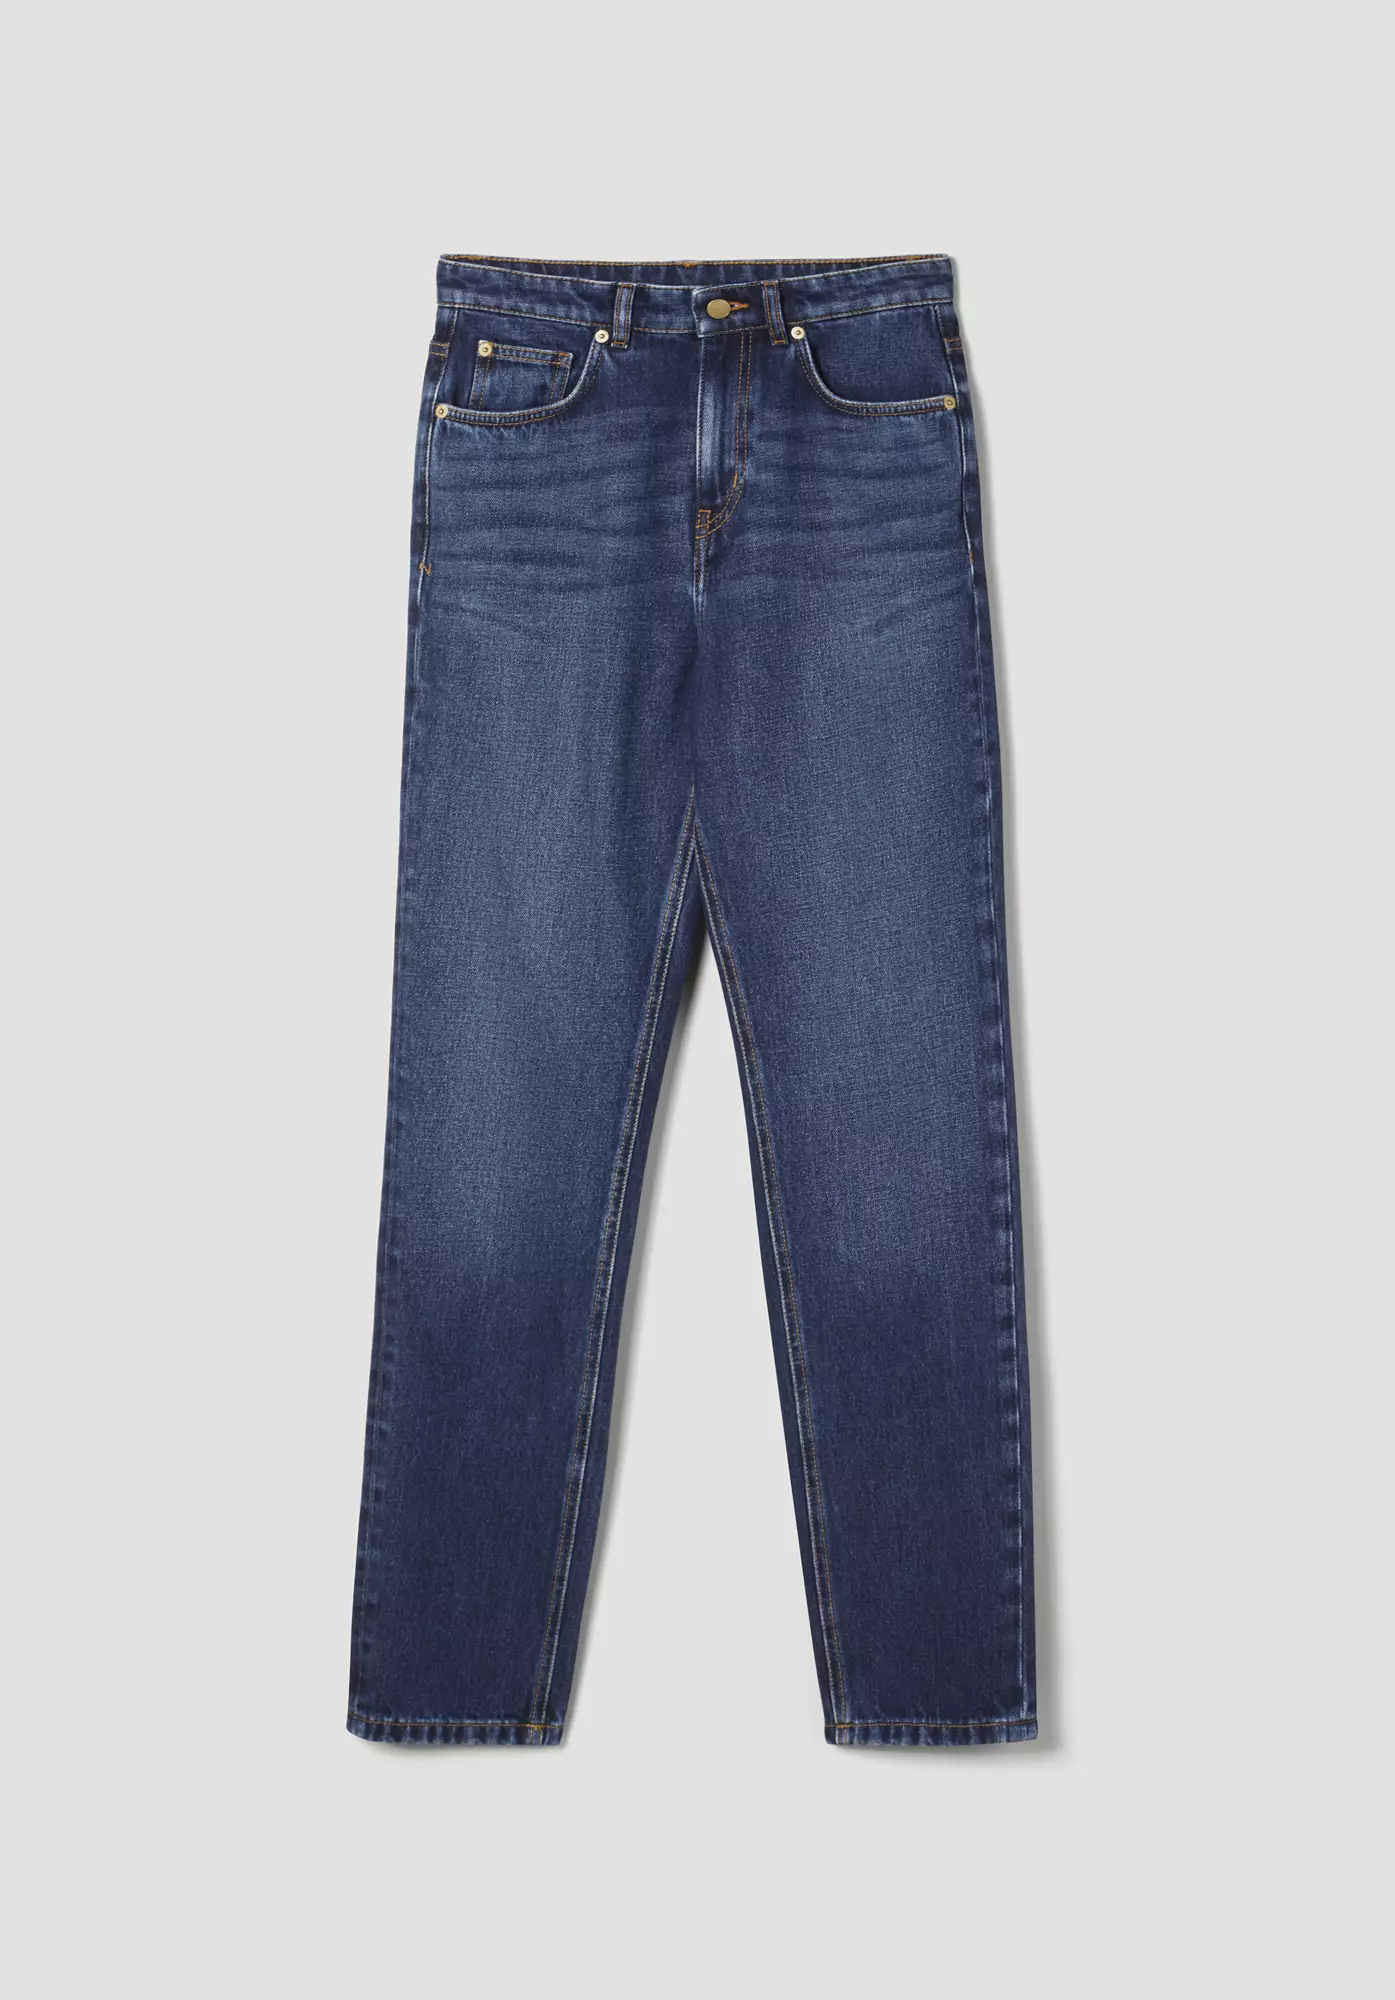 Hanna Mom Fit jeans made from pure organic denim - 4